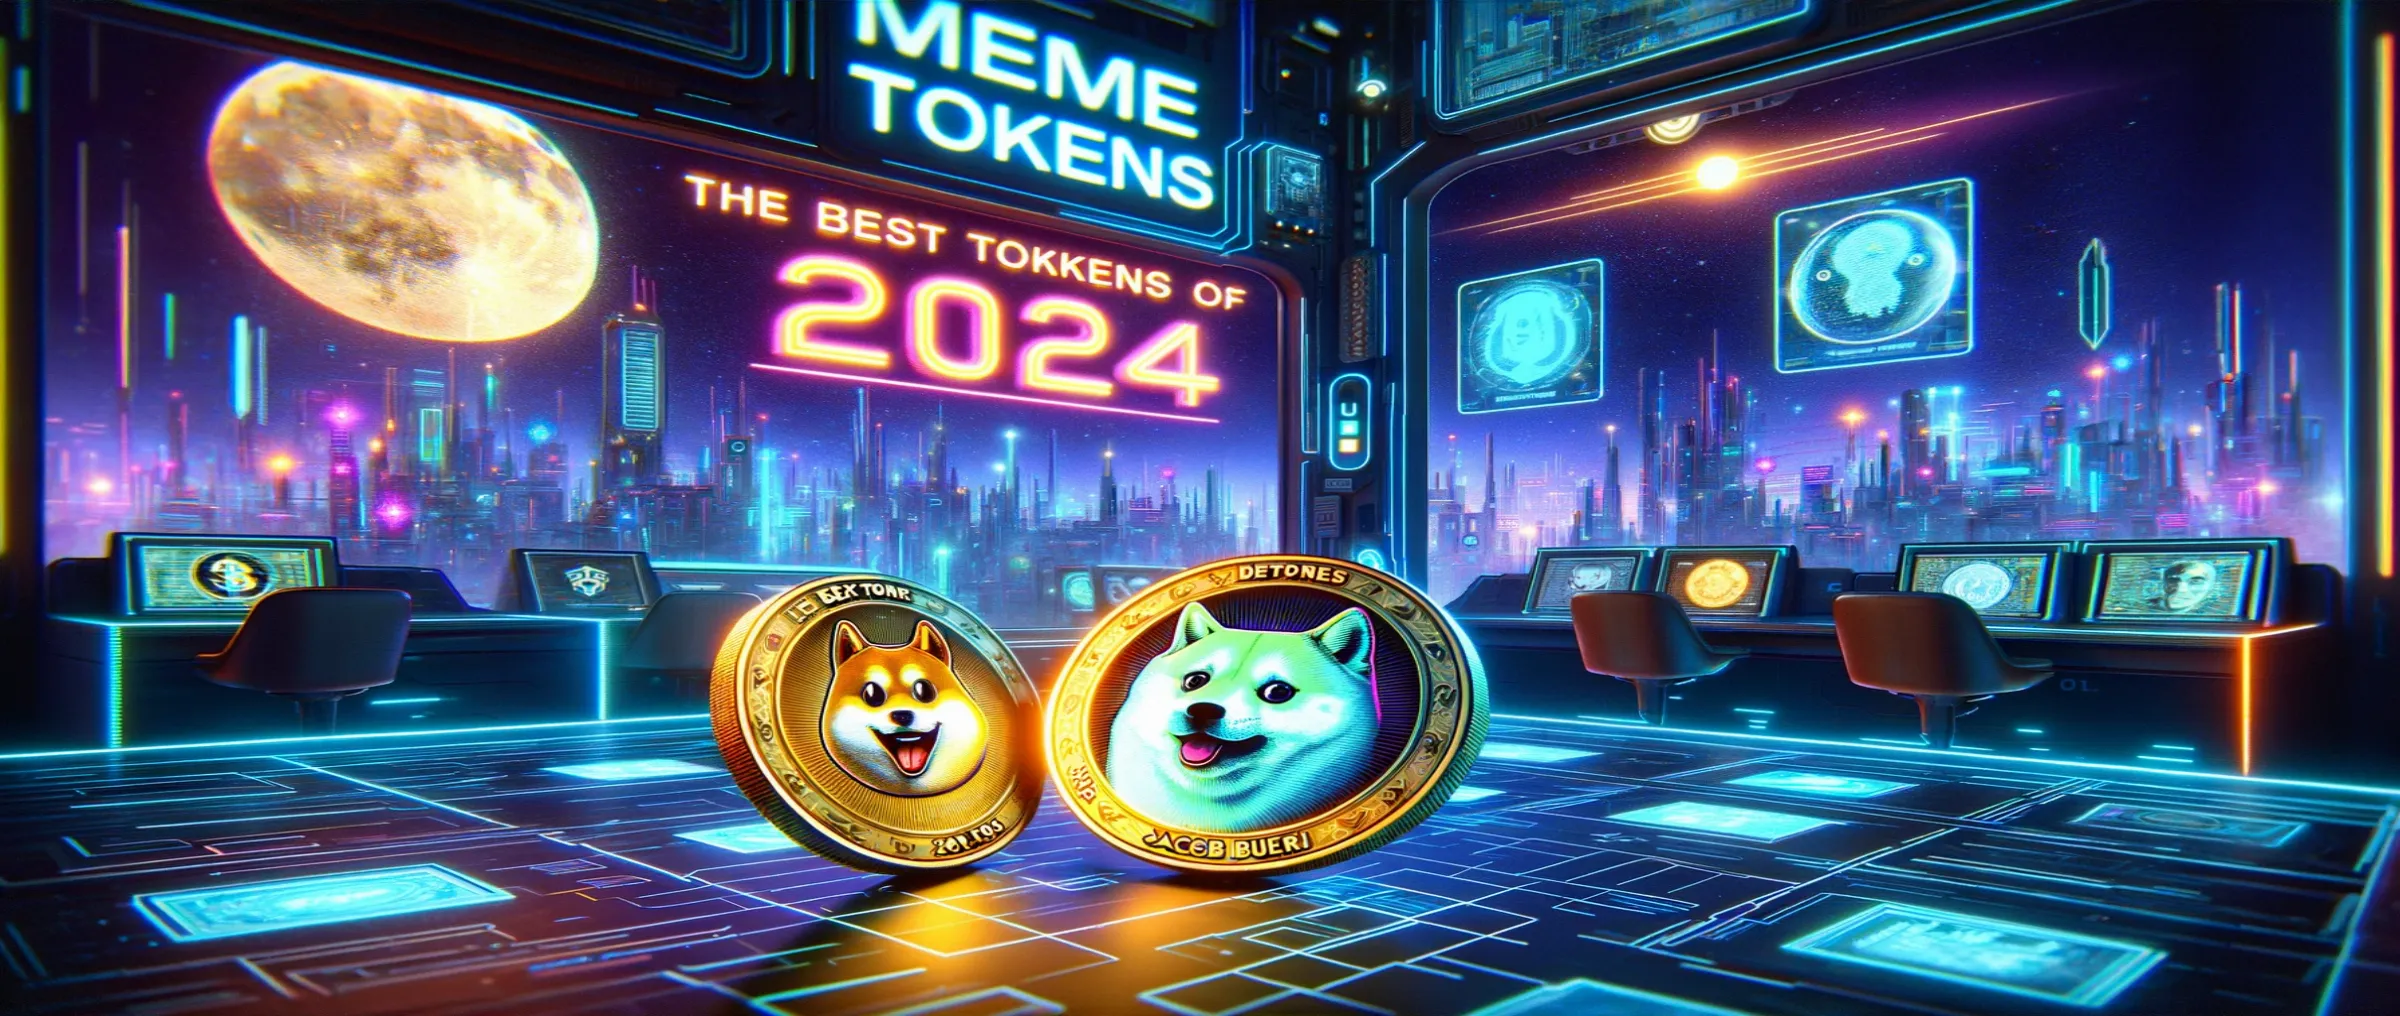 Jacob Bury has identified the two best meme tokens for 2024